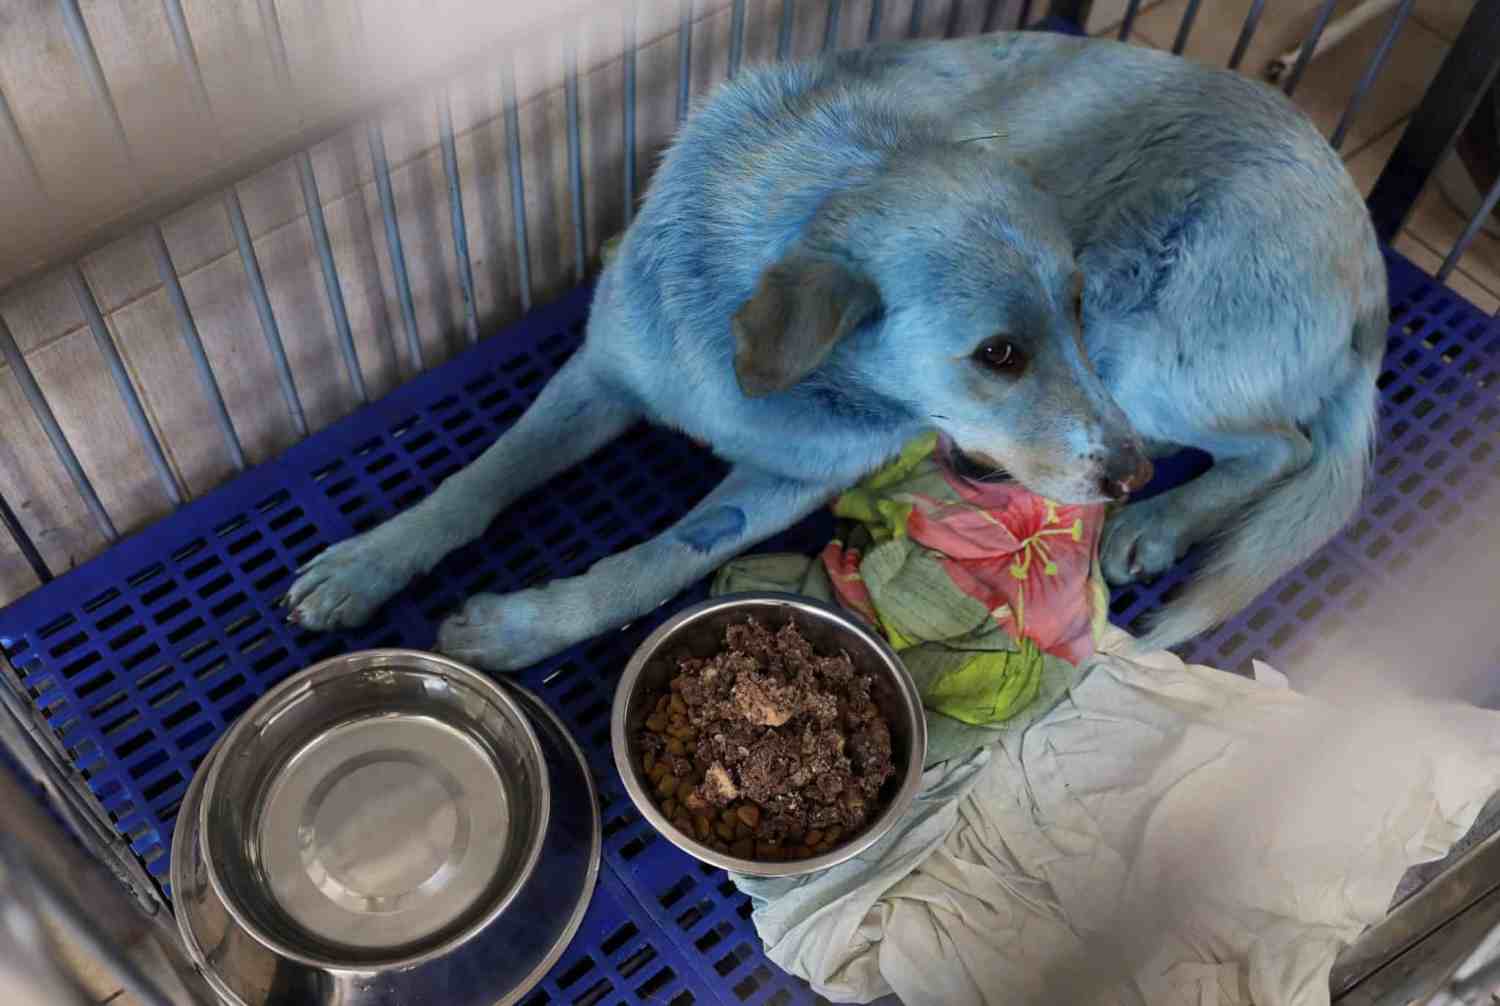 Stray Blue Dogs In Russia - A Strange Occurrence Observed Near An Abandoned Factory